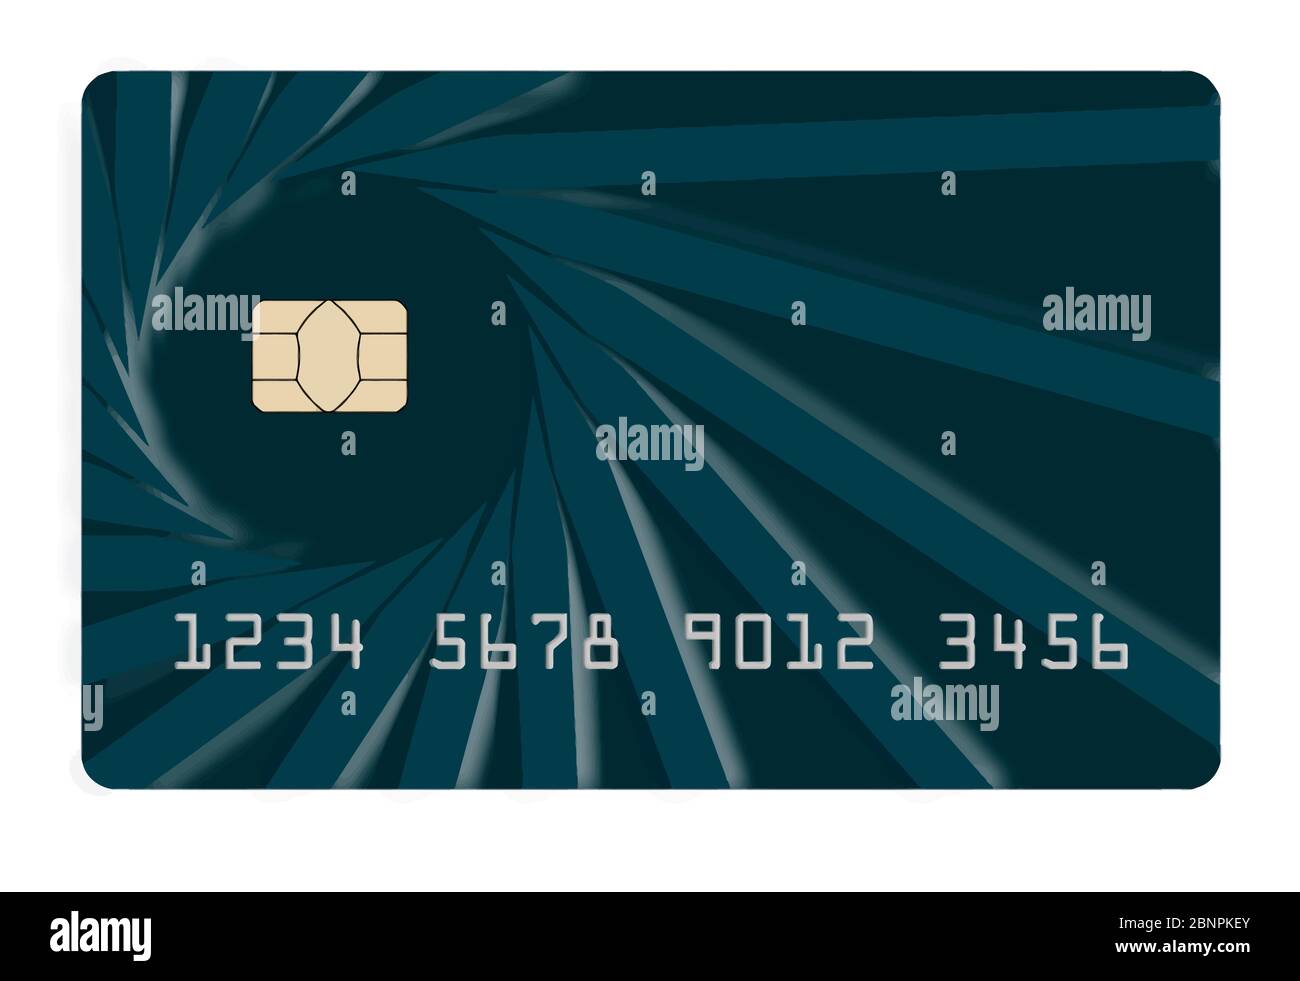 Here is a generic credit card or debit card Stock Vector